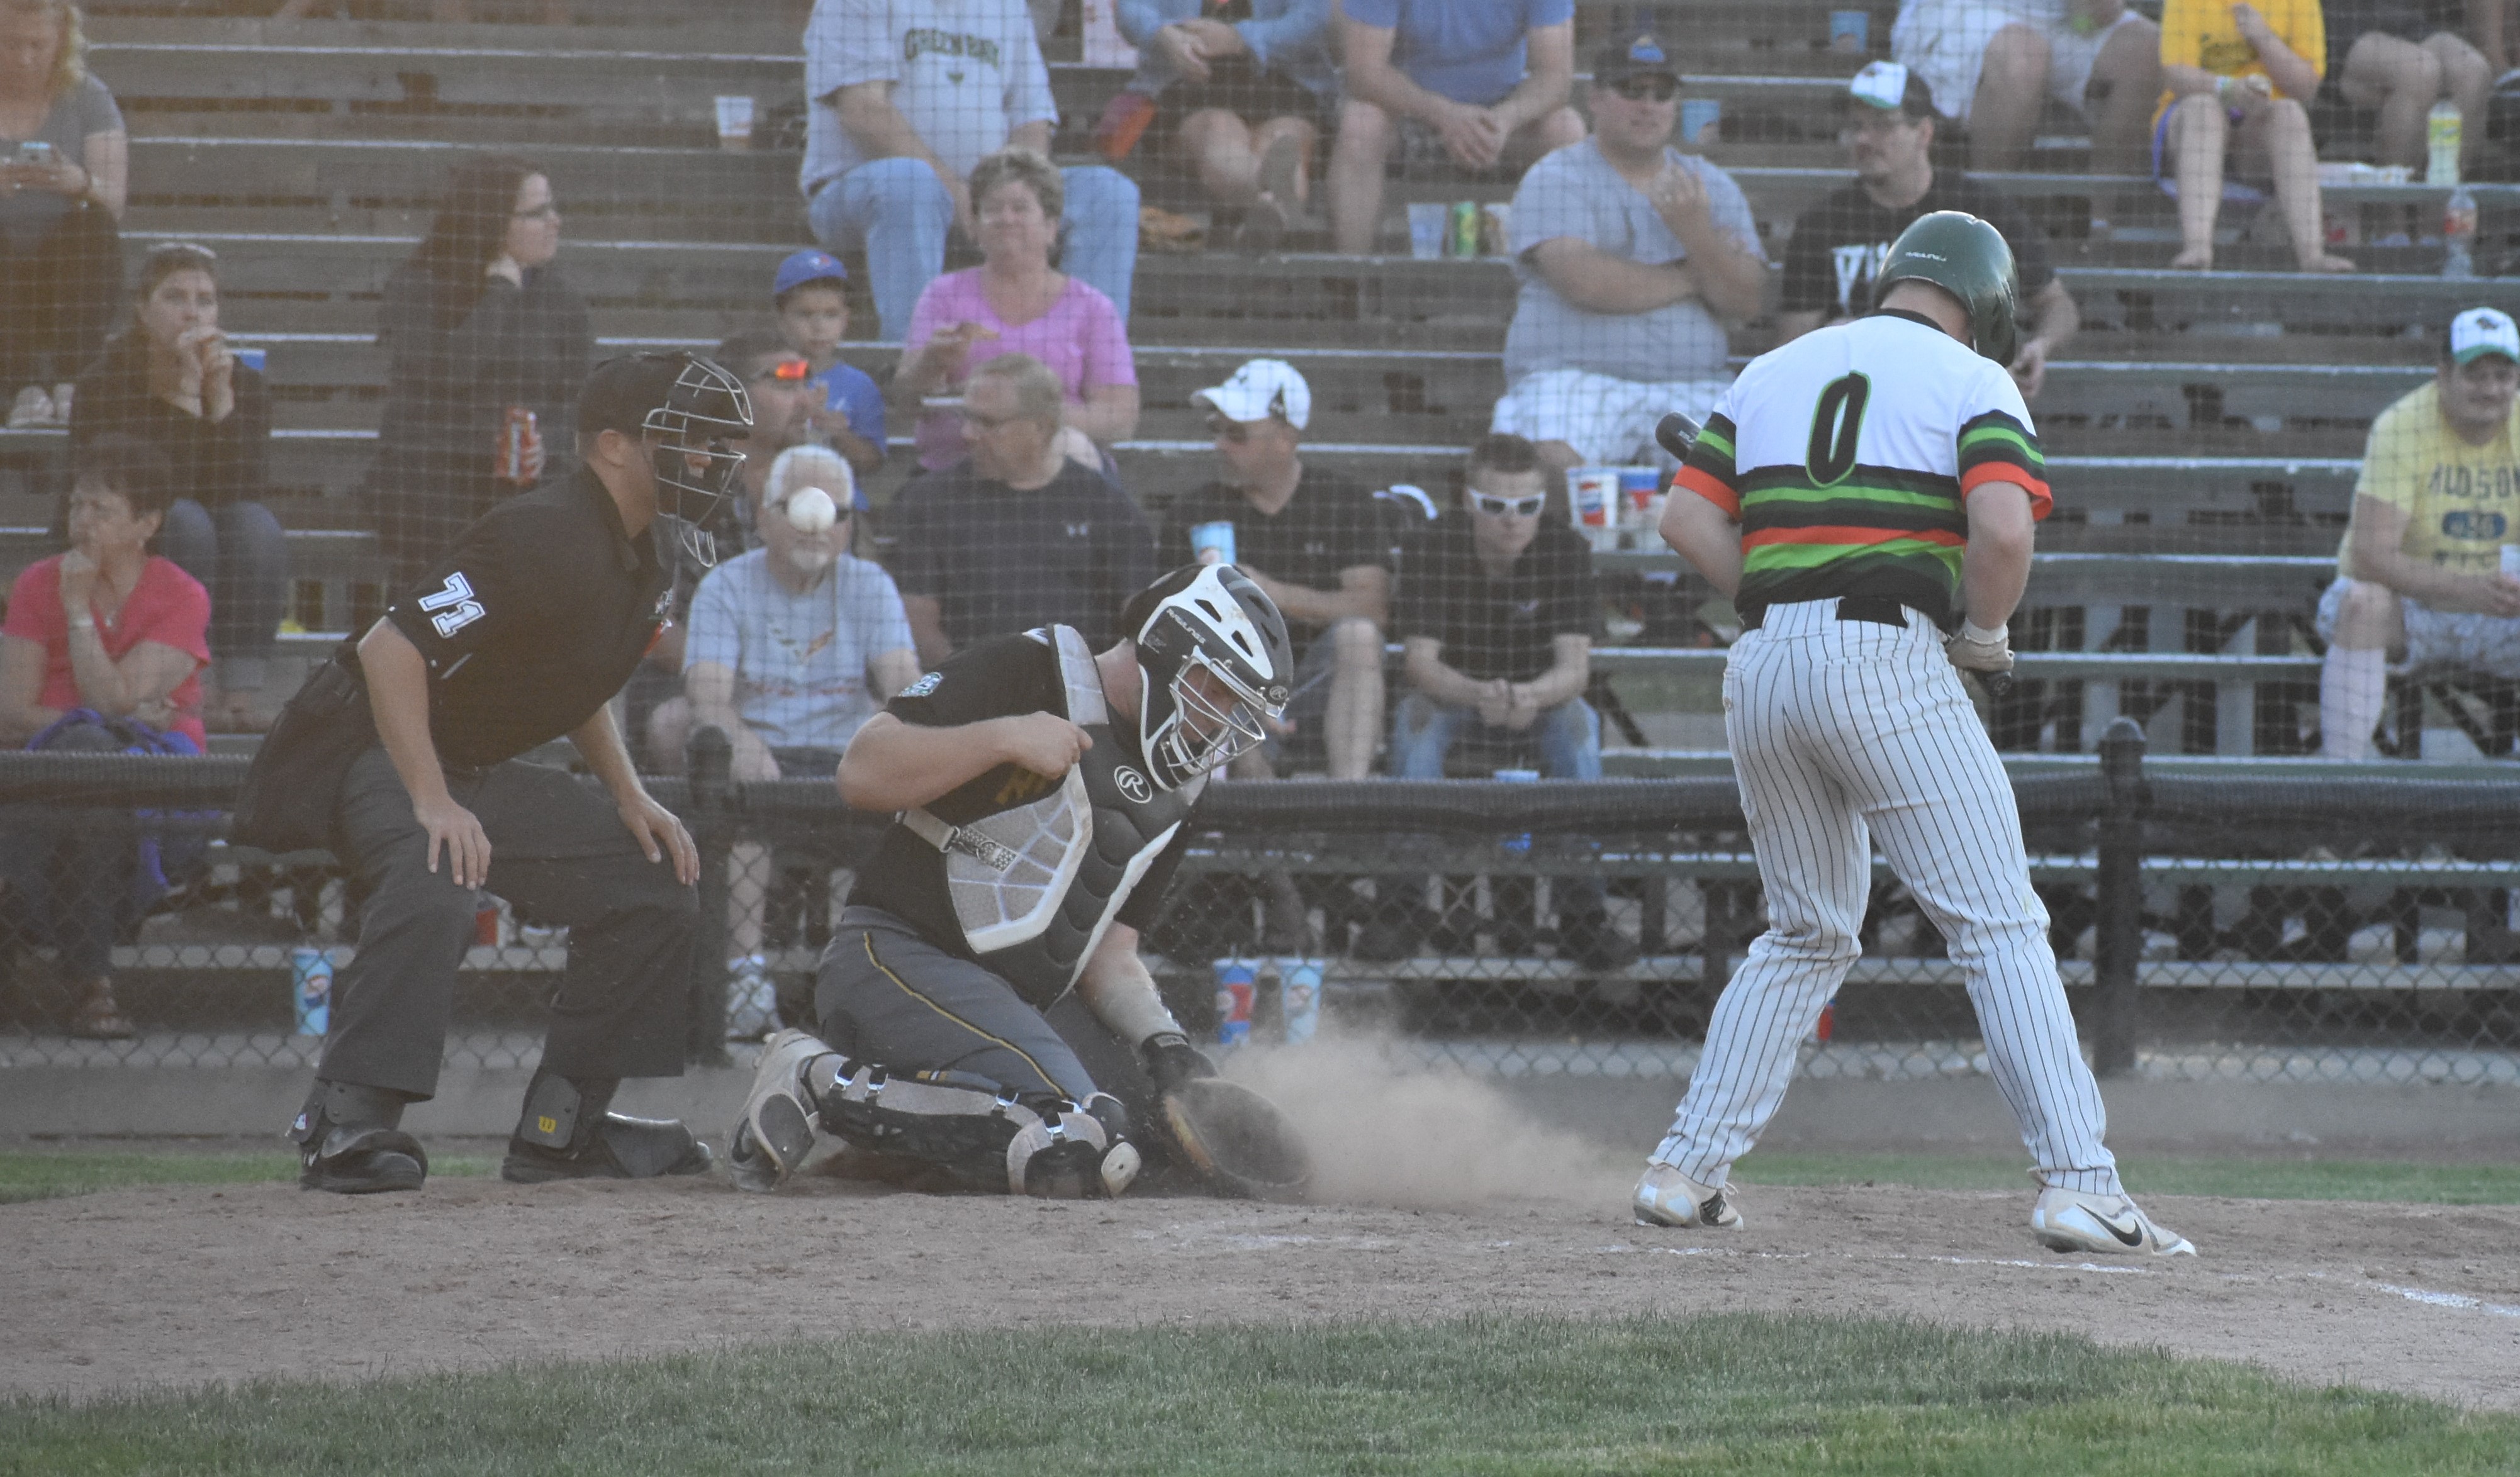 Bullfrogs rally from five runs down to win in dramatic finish